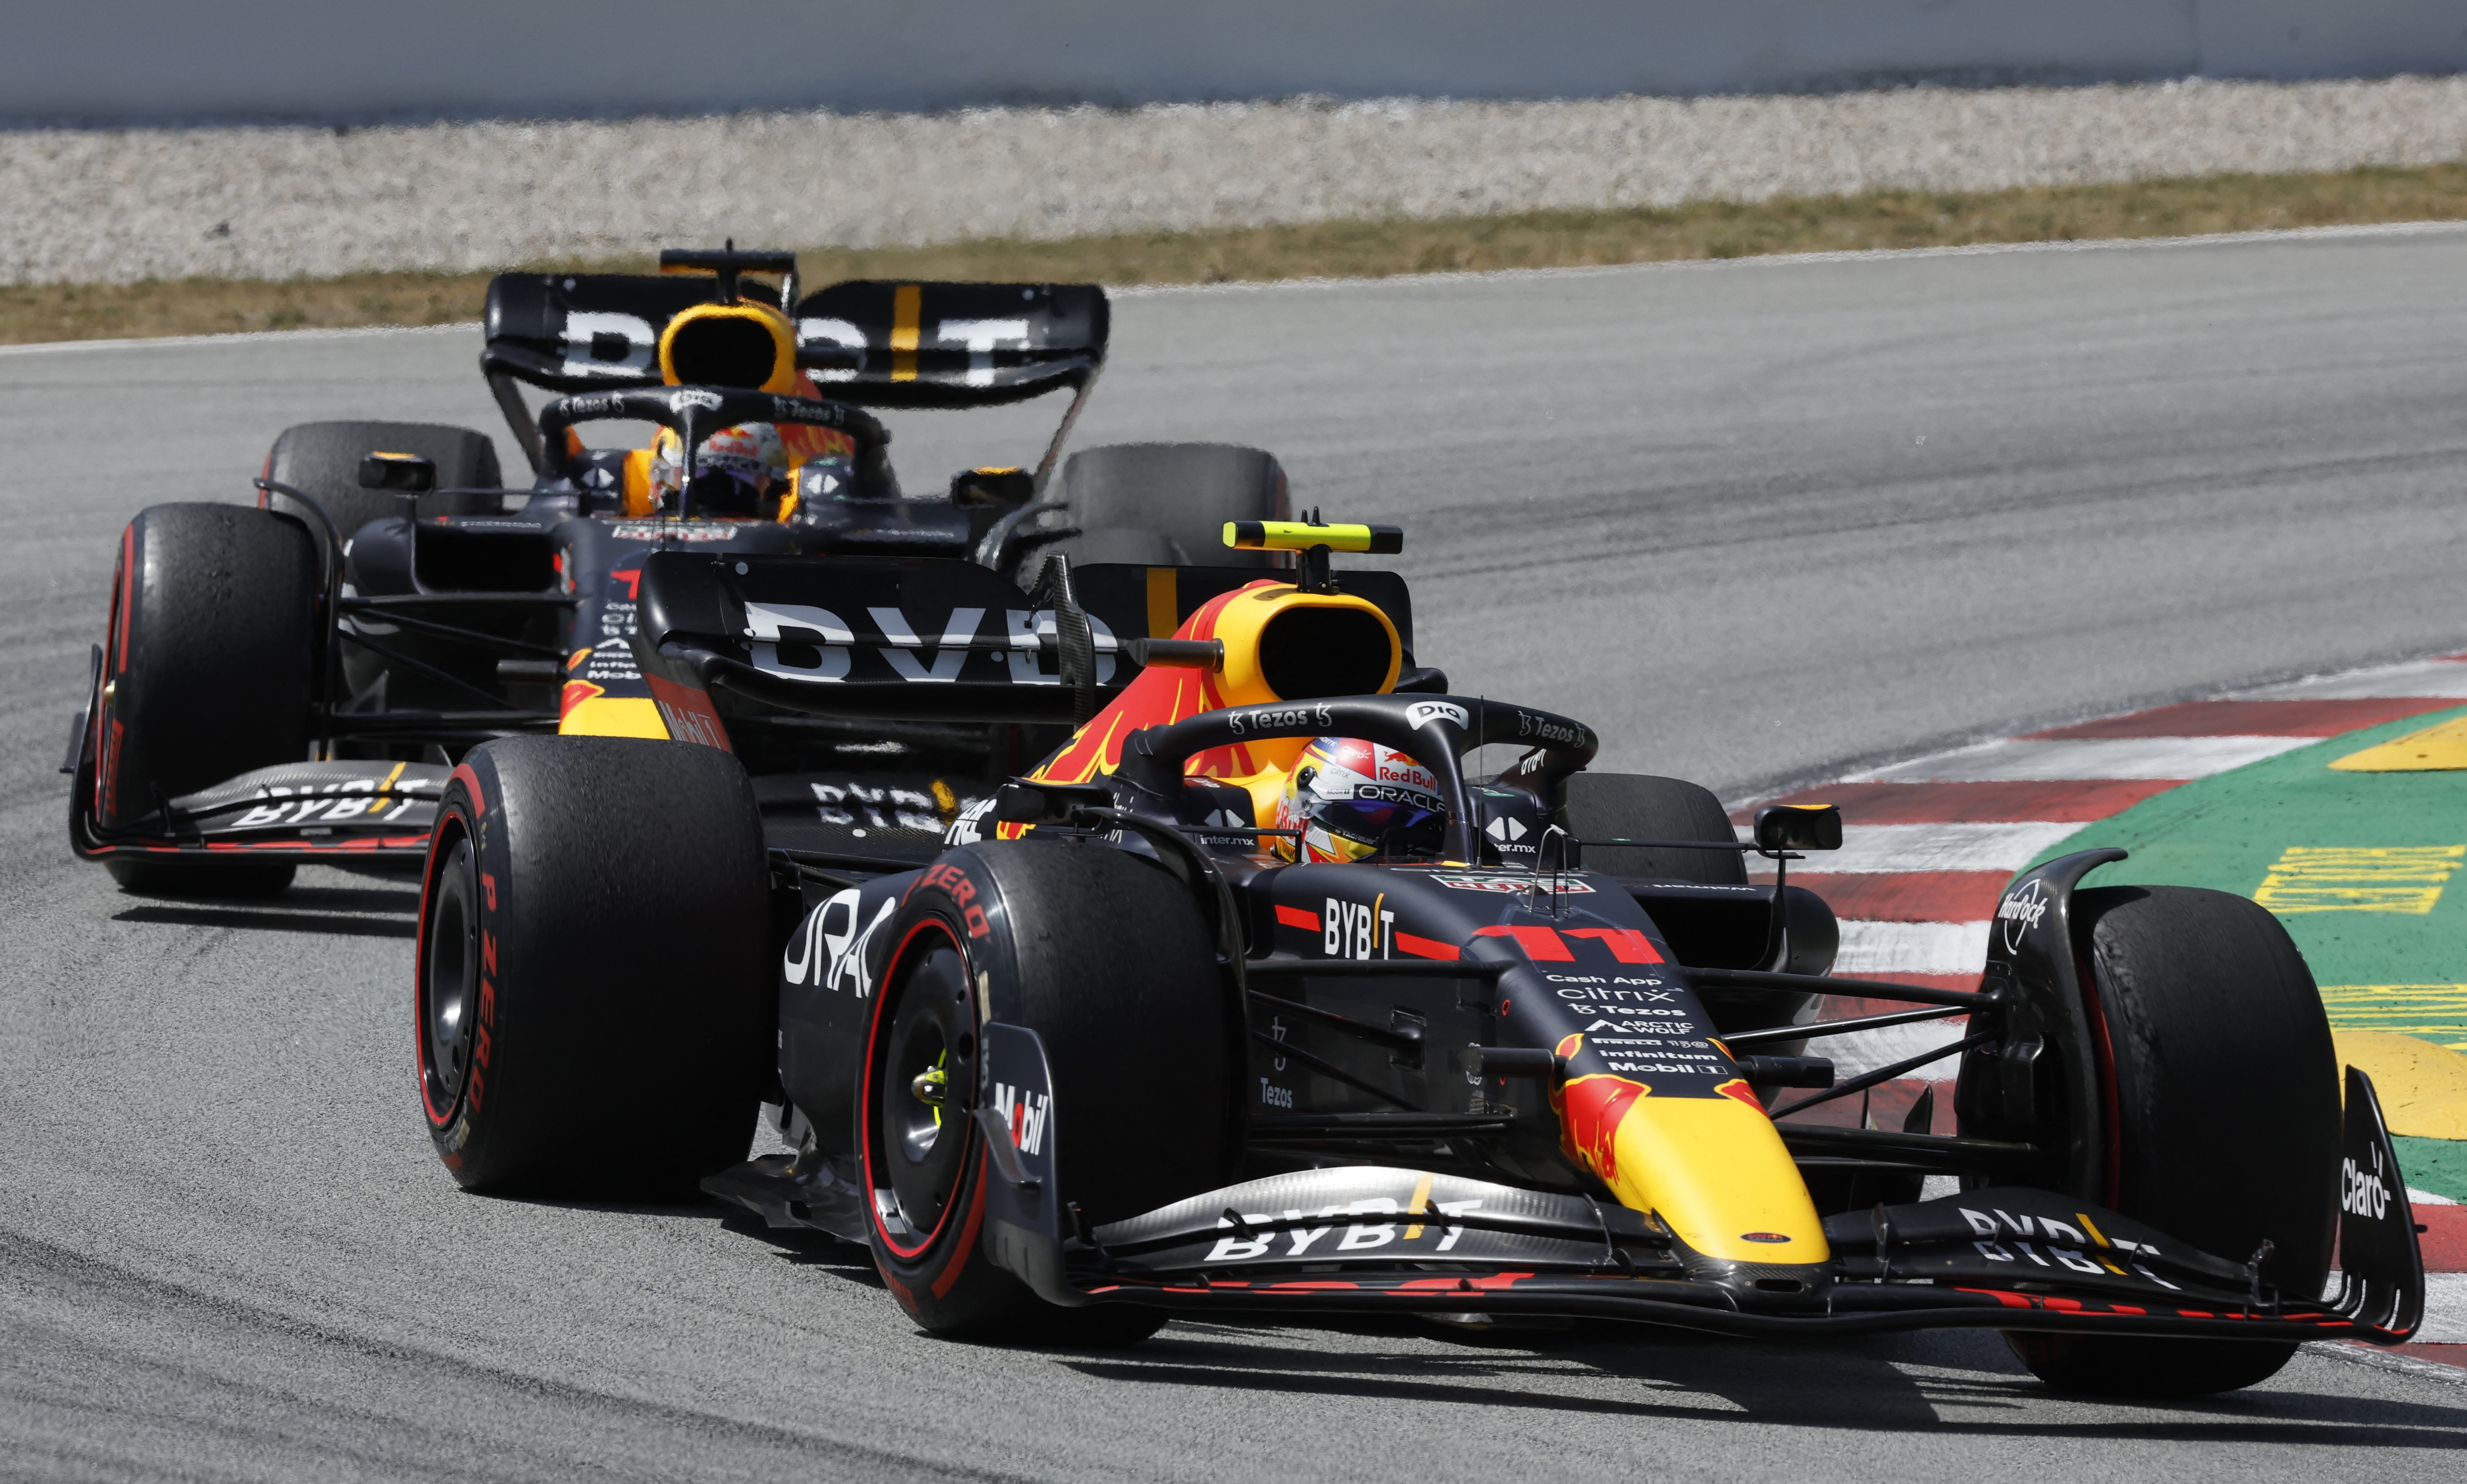 Checo Pérez let Max Verstappen pass to avoid contact by team orders (Photo: REUTERS/Albert Gea)